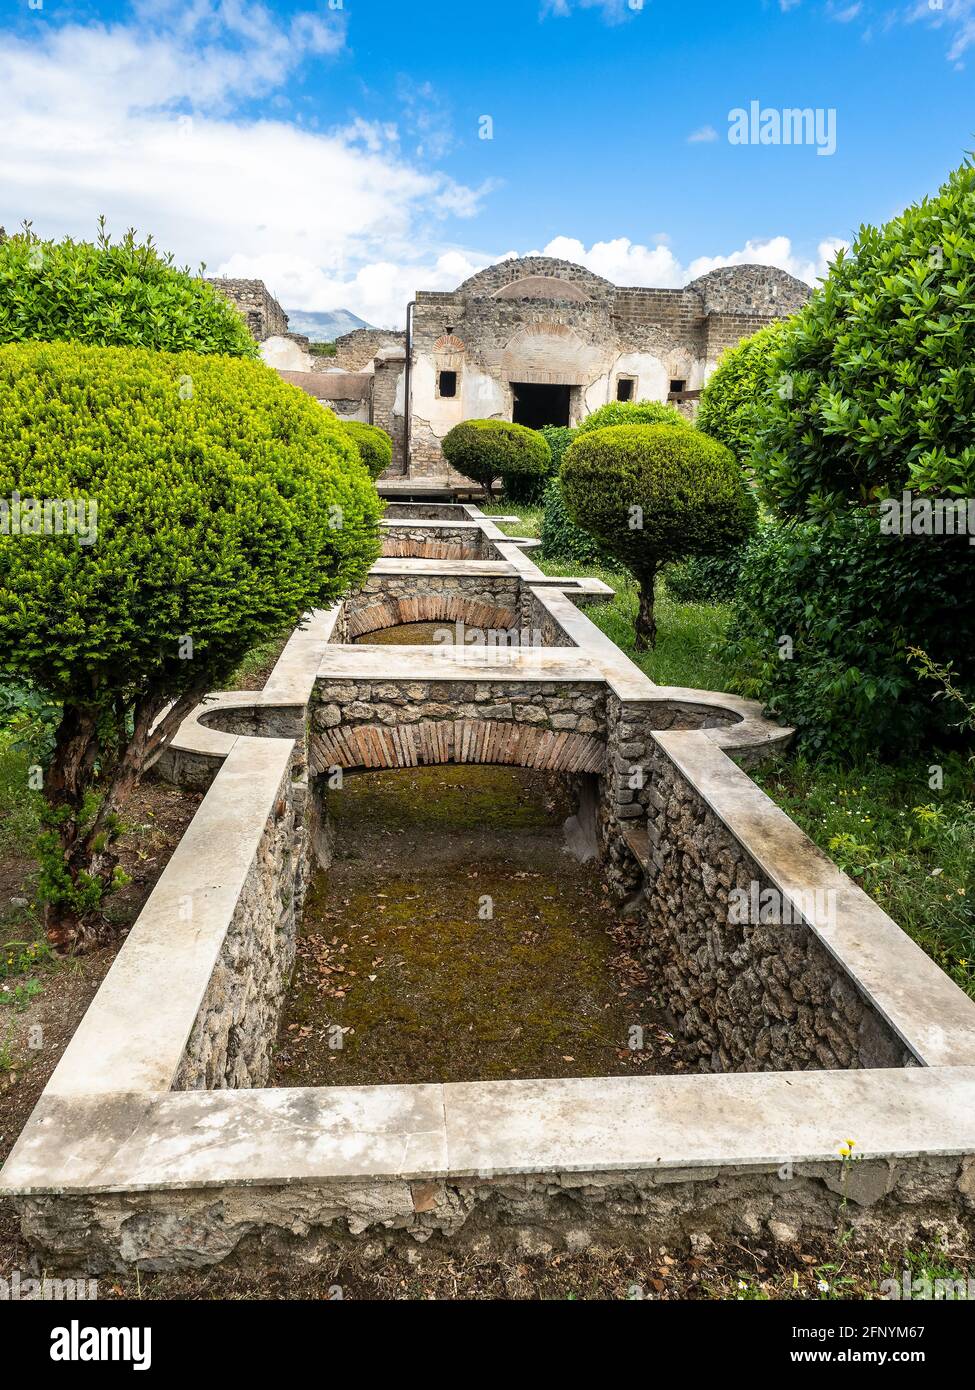 Praedia of Giulia Felice - The large complex of properties of Giulia Felice is implemented at the end of the 1st century BC following the incorporation of previous buildings into a single building complex set as an 'urban villa' - Pompeii archaeological site, Italy Stock Photo